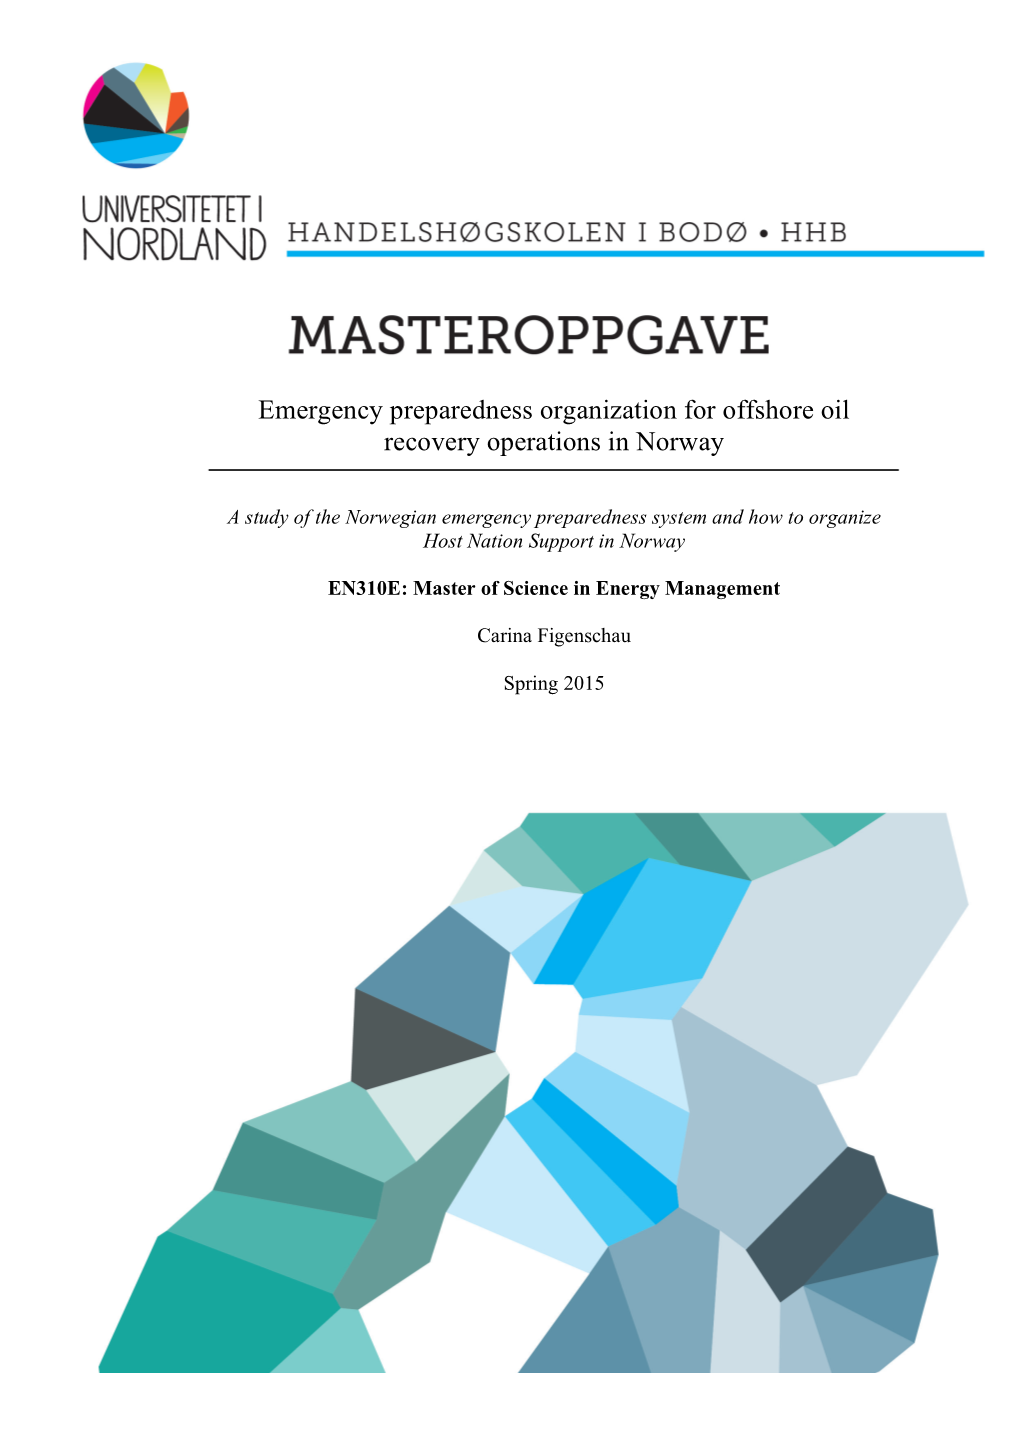 Emergency Preparedness Organization for Offshore Oil Recovery Operations in Norway